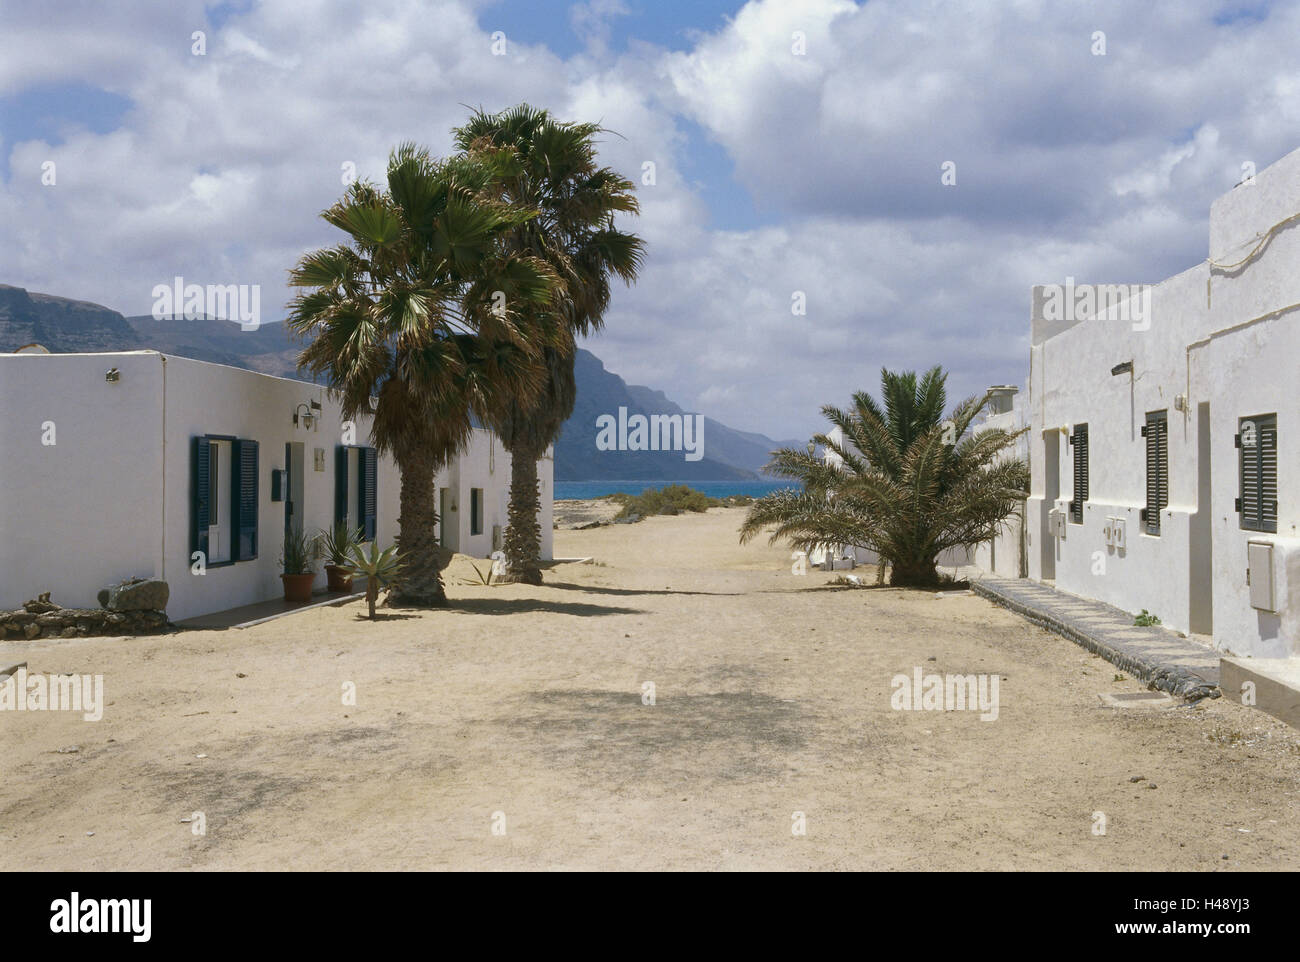 Spain, the Canaries, island La Graciosa, Caleta del Sebo, Dorfstrasse, houses, palms, architecture, street, dusty, heat, wilderness, defensive wall, clouds, heavens, residential houses, exit, outside, deserted, Stock Photo